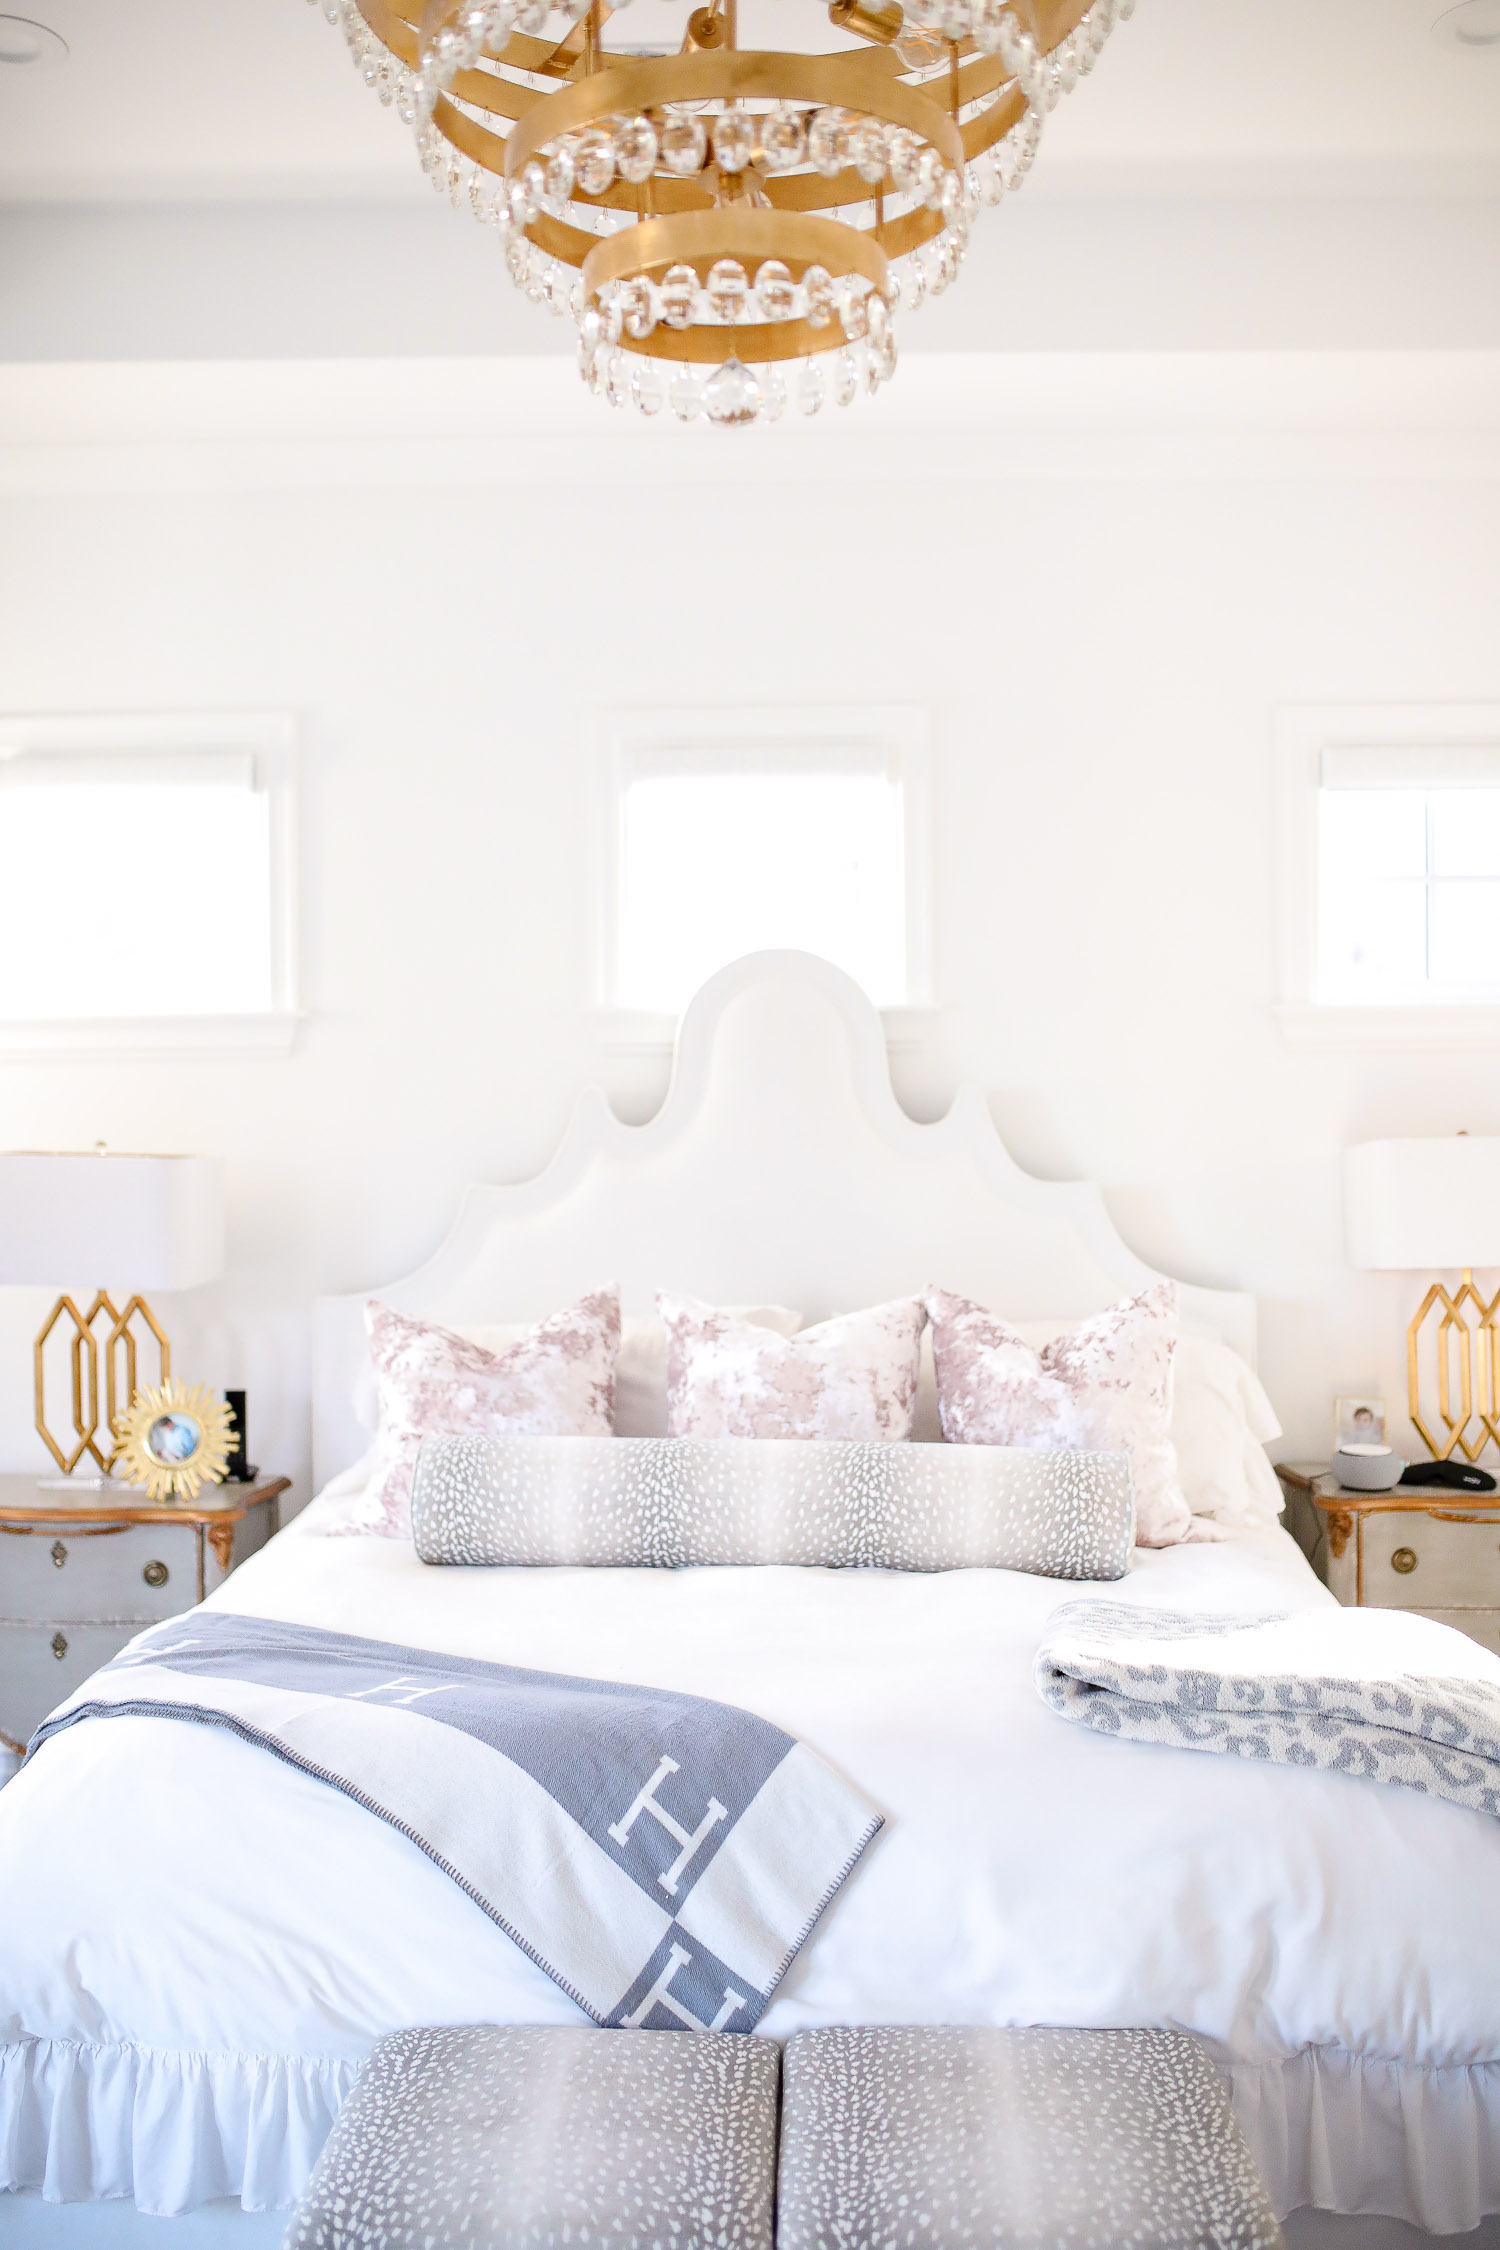 Instagram Recap by popular US lifestyle blog, The Sweetest Thing: image of a bedroom decorated with a Wayfair nightstand, Wayfair Meela Queen Standard Bed, Horchow Prescott Triple Table Lamp, Etsy Lavish Velvet // Mist Pillow COVER, Etsy The Little Bolster : Antelope Linen Print, Nordstrom Leopard Throw Blanket NORDSTROM, Wayfair Buckhead 6-Light Candle Style Classic / Traditional Chandelier, Horchow Crystorama Perla 5-Light Chandelier, and Etsy The Skirted Ottoman : Antelope Linen Print.